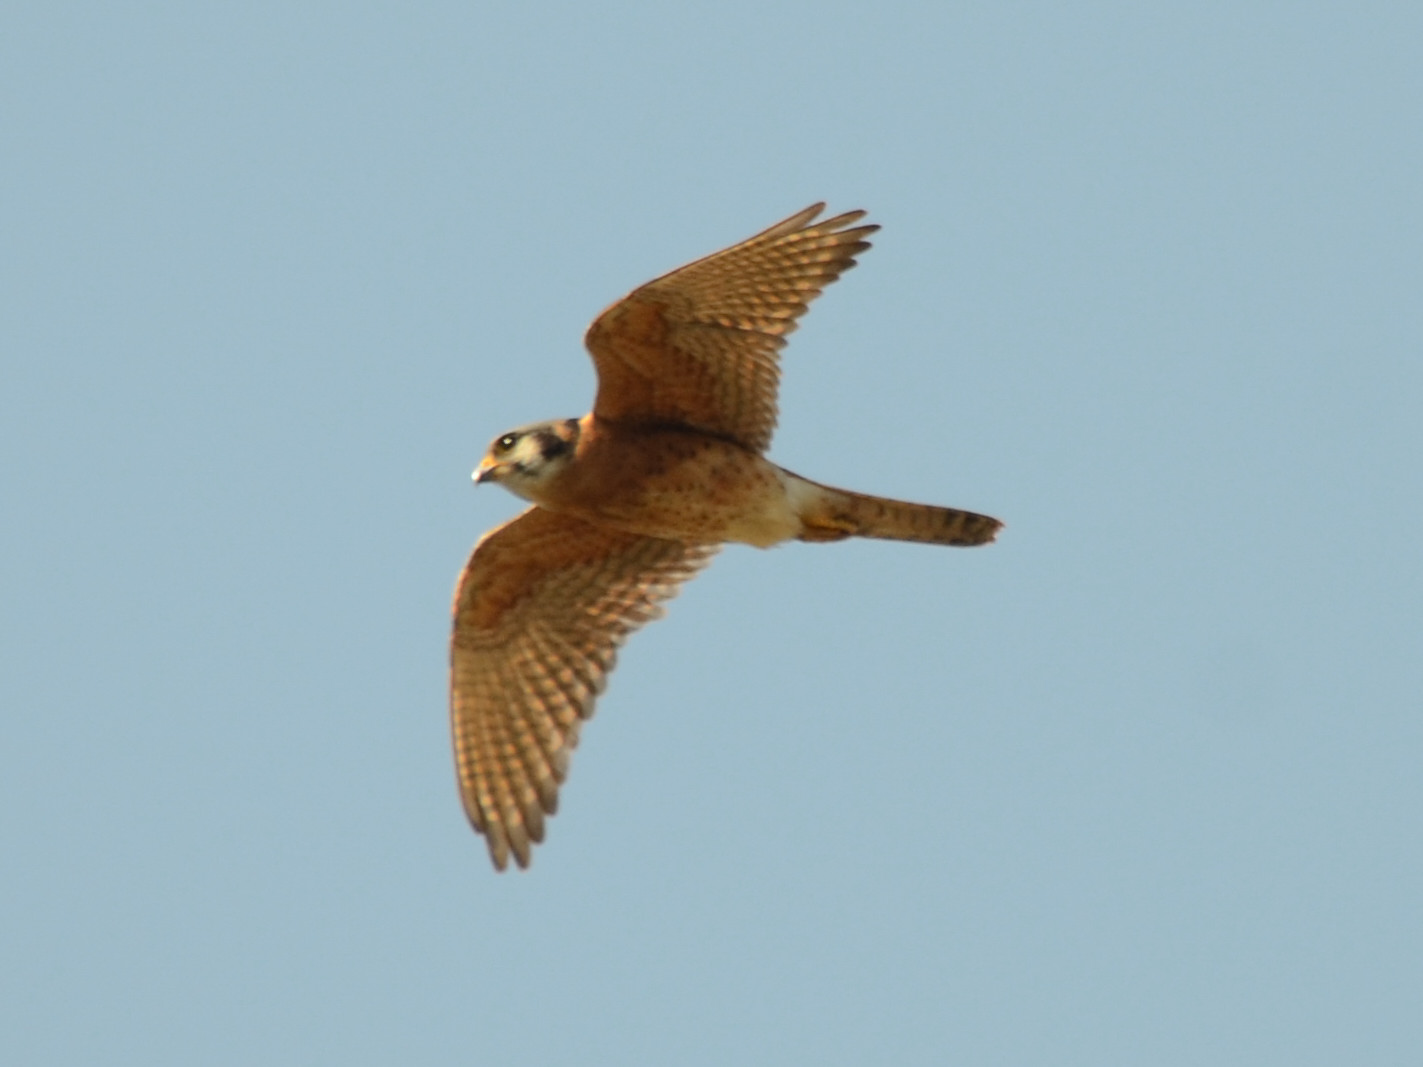 Click picture to see more  American Kestrels.